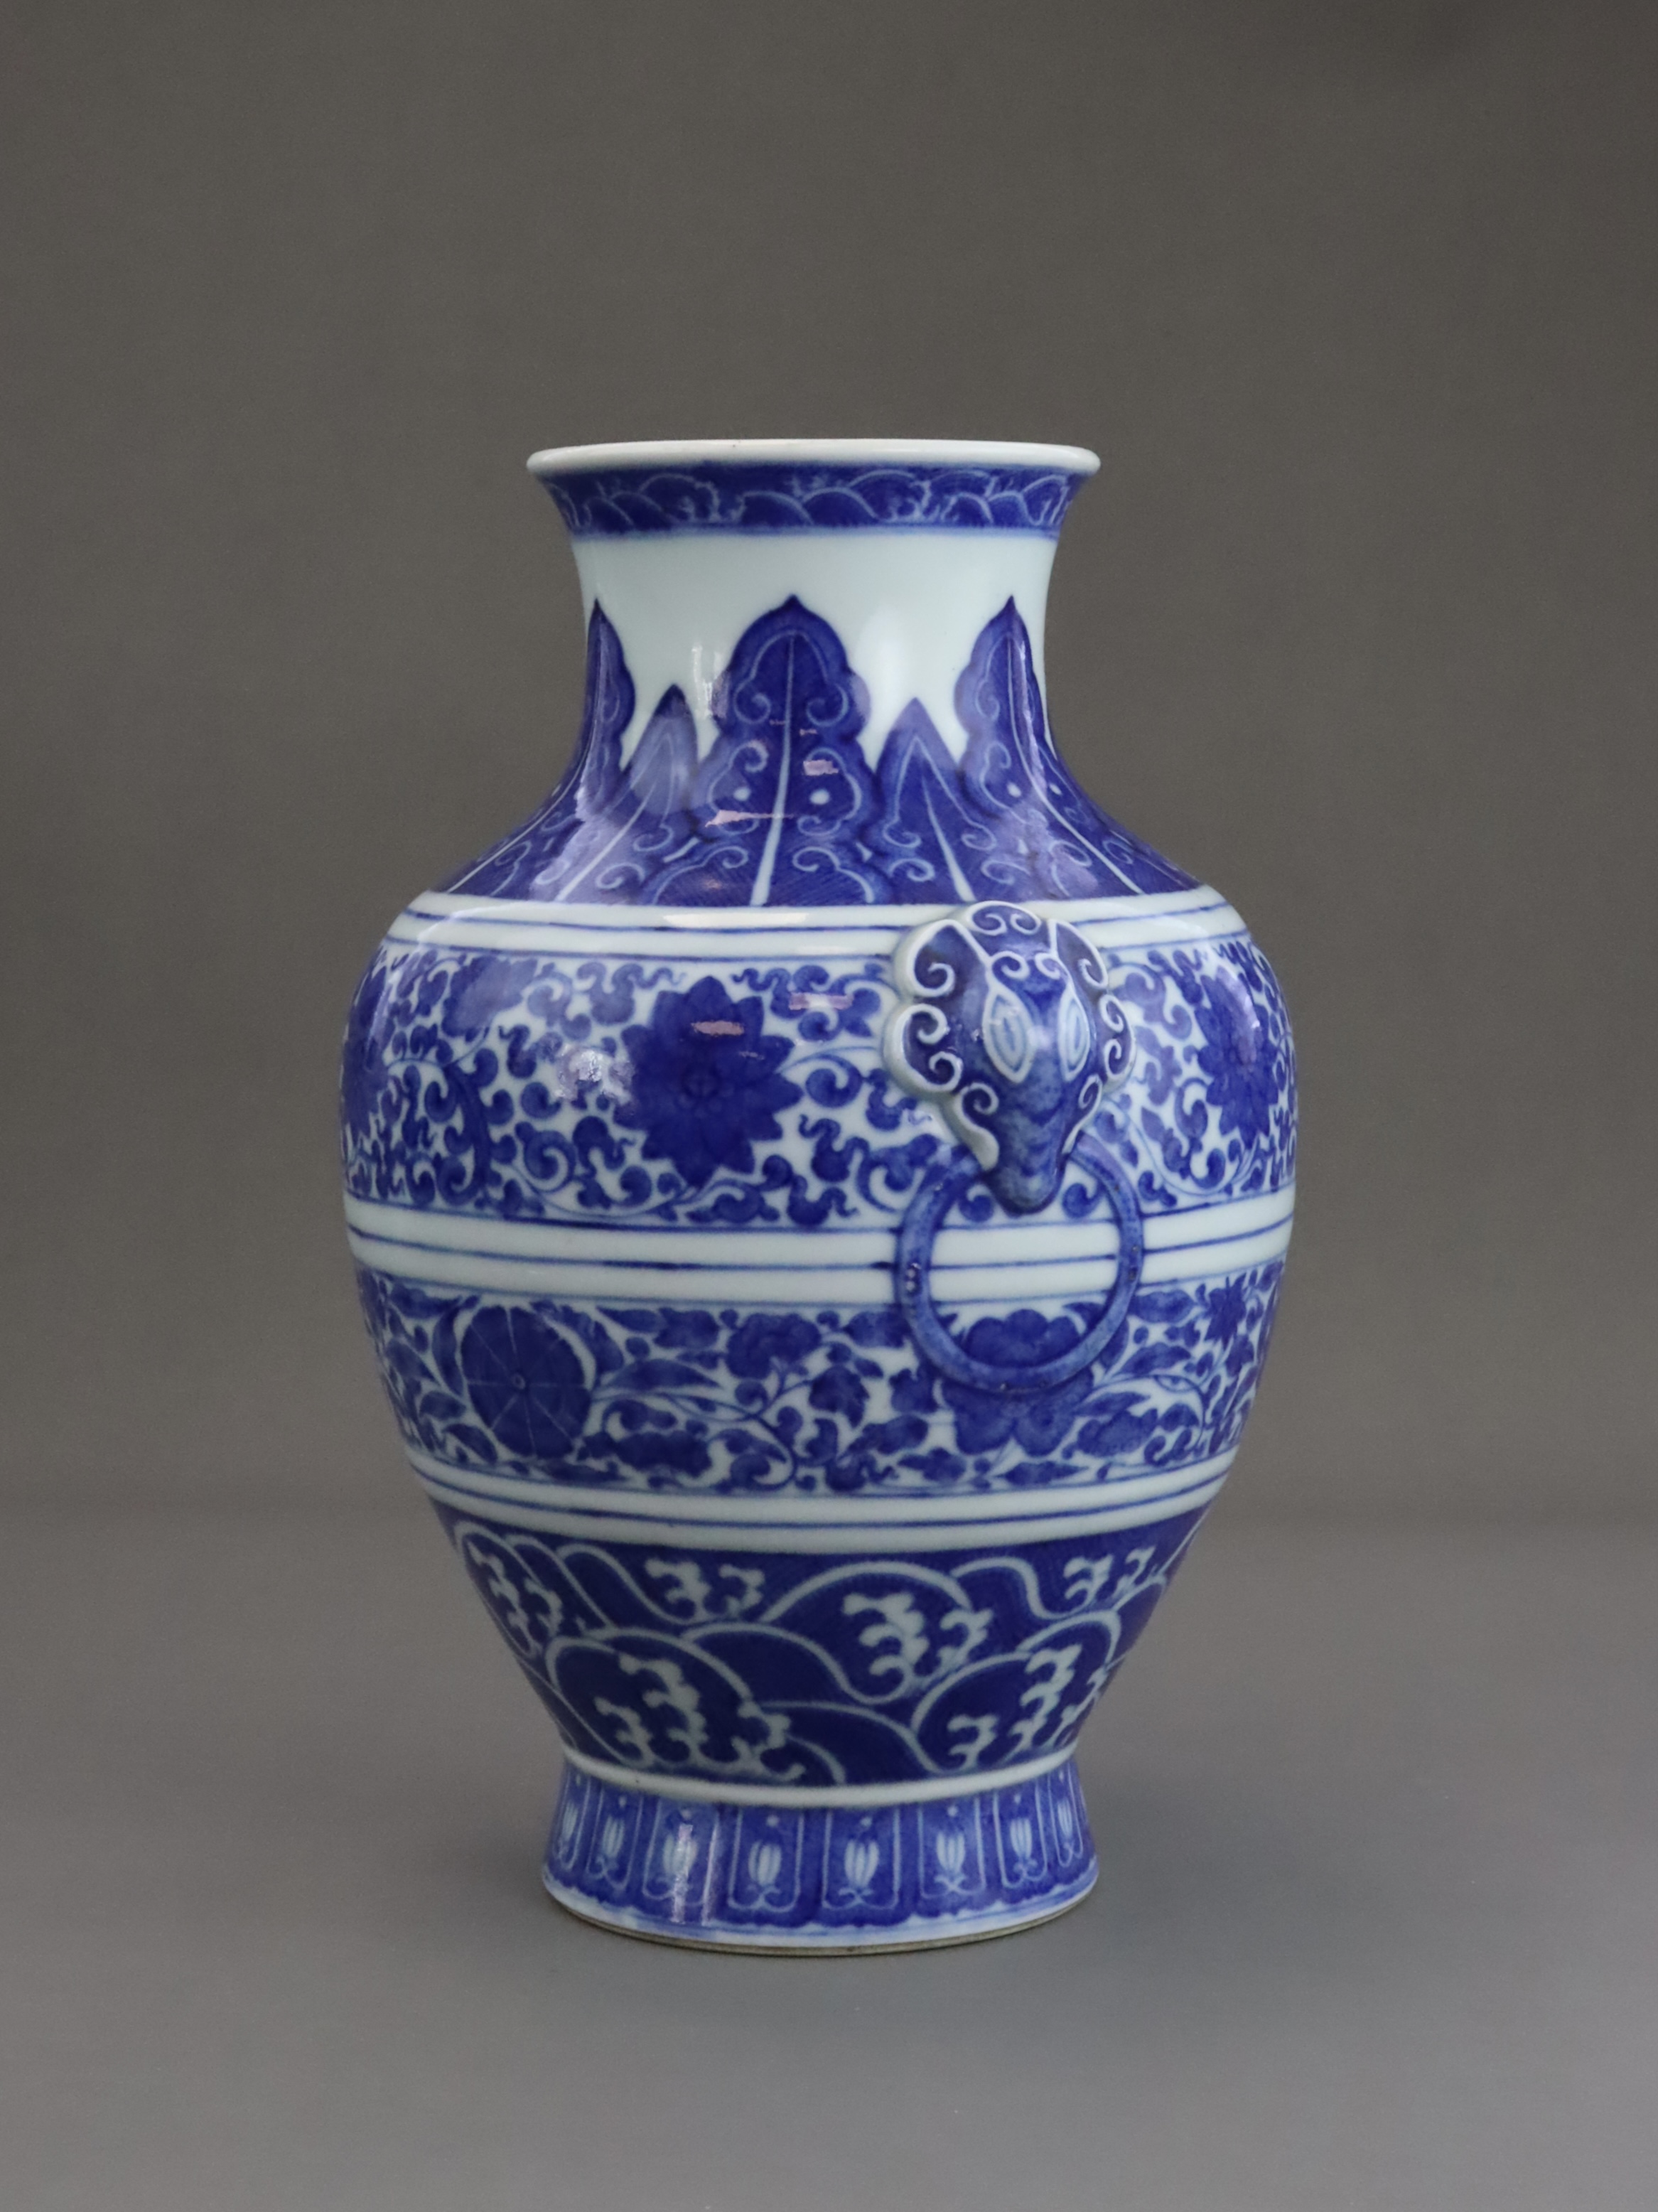 A Good Blue and White Ming style Vase, hu, six character seal mark of Qianlong, Qing dynasty, - Image 7 of 9